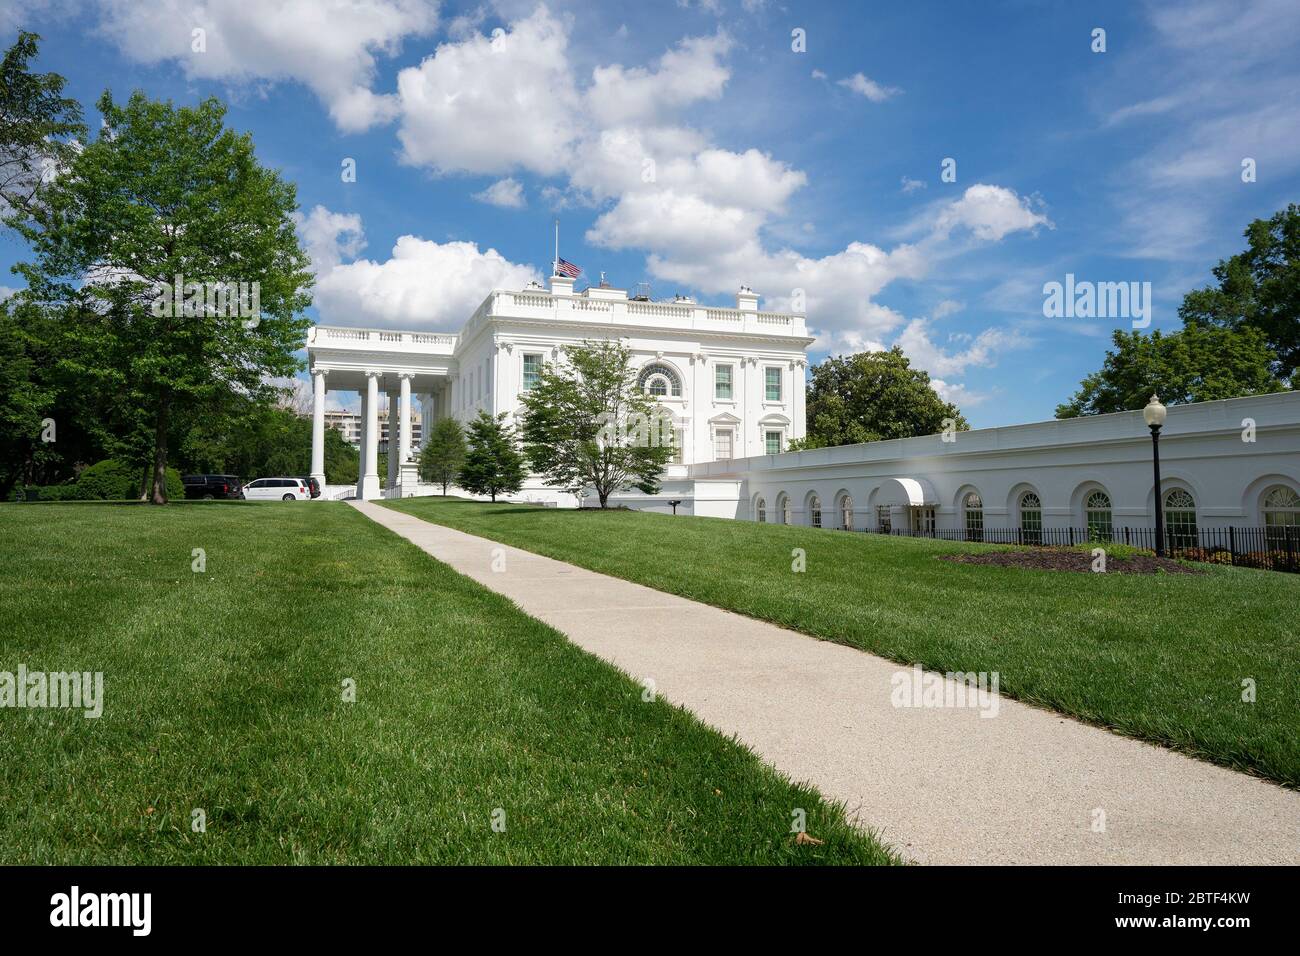 Washington, DC, USA. 23rd May, 2020. The White House is seen in Washington, DC, U.S., on Saturday, May 23, 2020. United States President Donald J. Trump ordered American flags to be flown at half-staff until May 24, 2020 to honor the victims of COVID-19. Credit: Stefani Reynolds/CNP | usage worldwide Credit: dpa/Alamy Live News Stock Photo